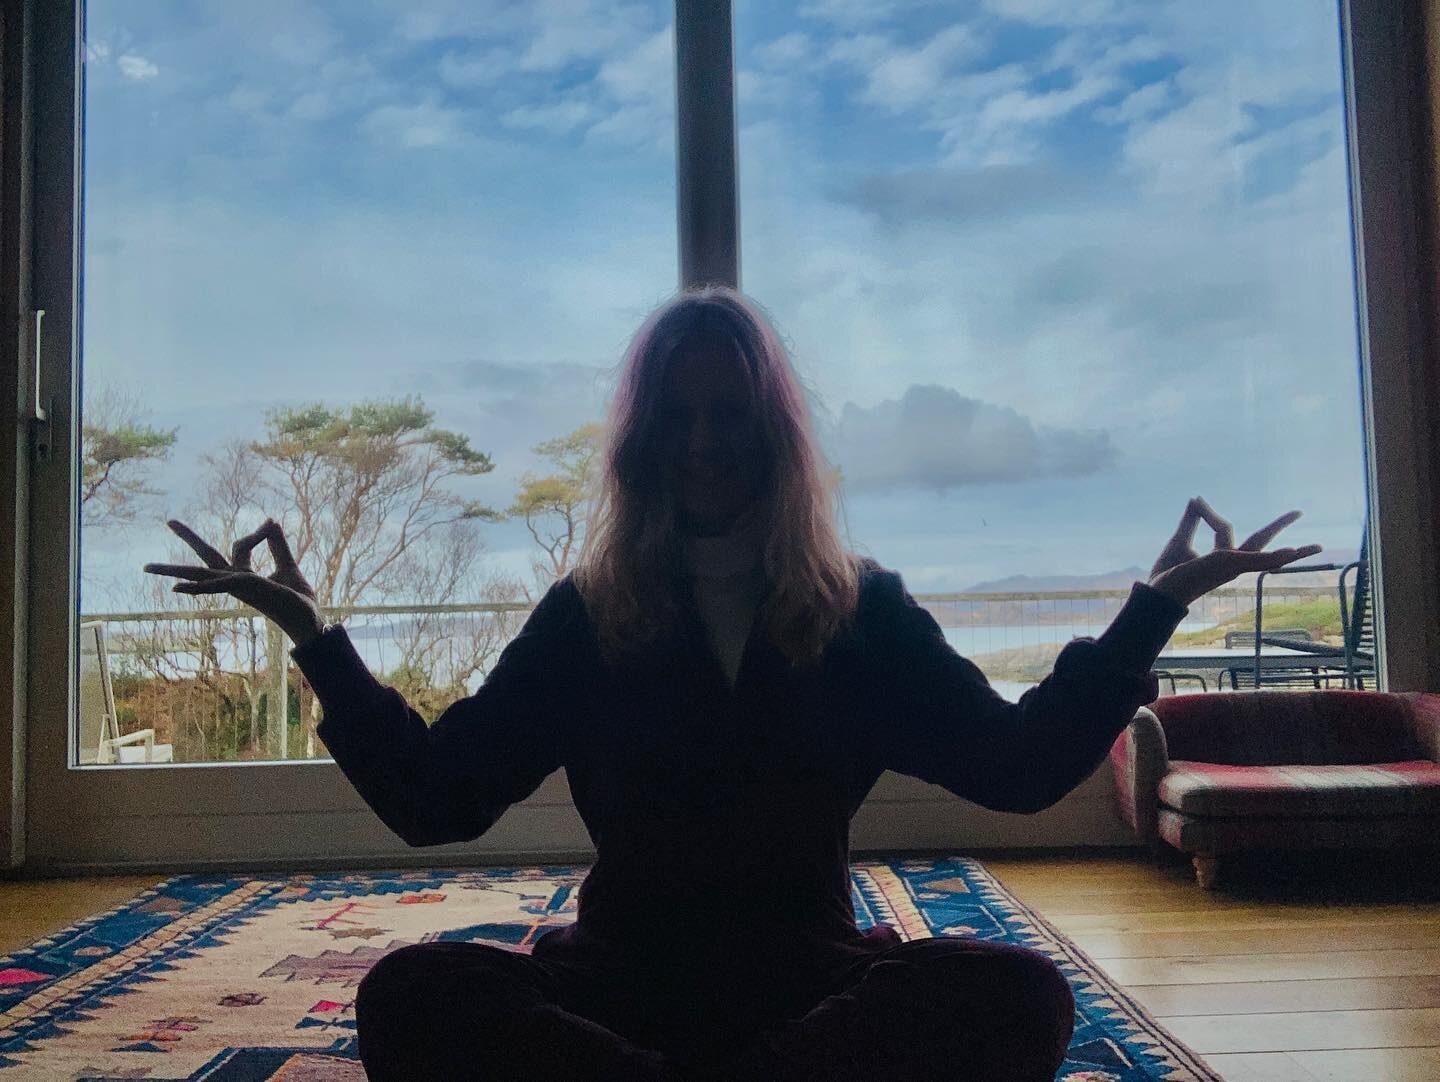 Delighted to be in this magical part of bonnie Scotland and getting into the yoga zone 🧘&zwj;♀️🙏🏻 (check out the little doggy sofa 🤗🐕) #ilovemyjob #privateretreat #dogsofa #beautifulscotland #stunningview